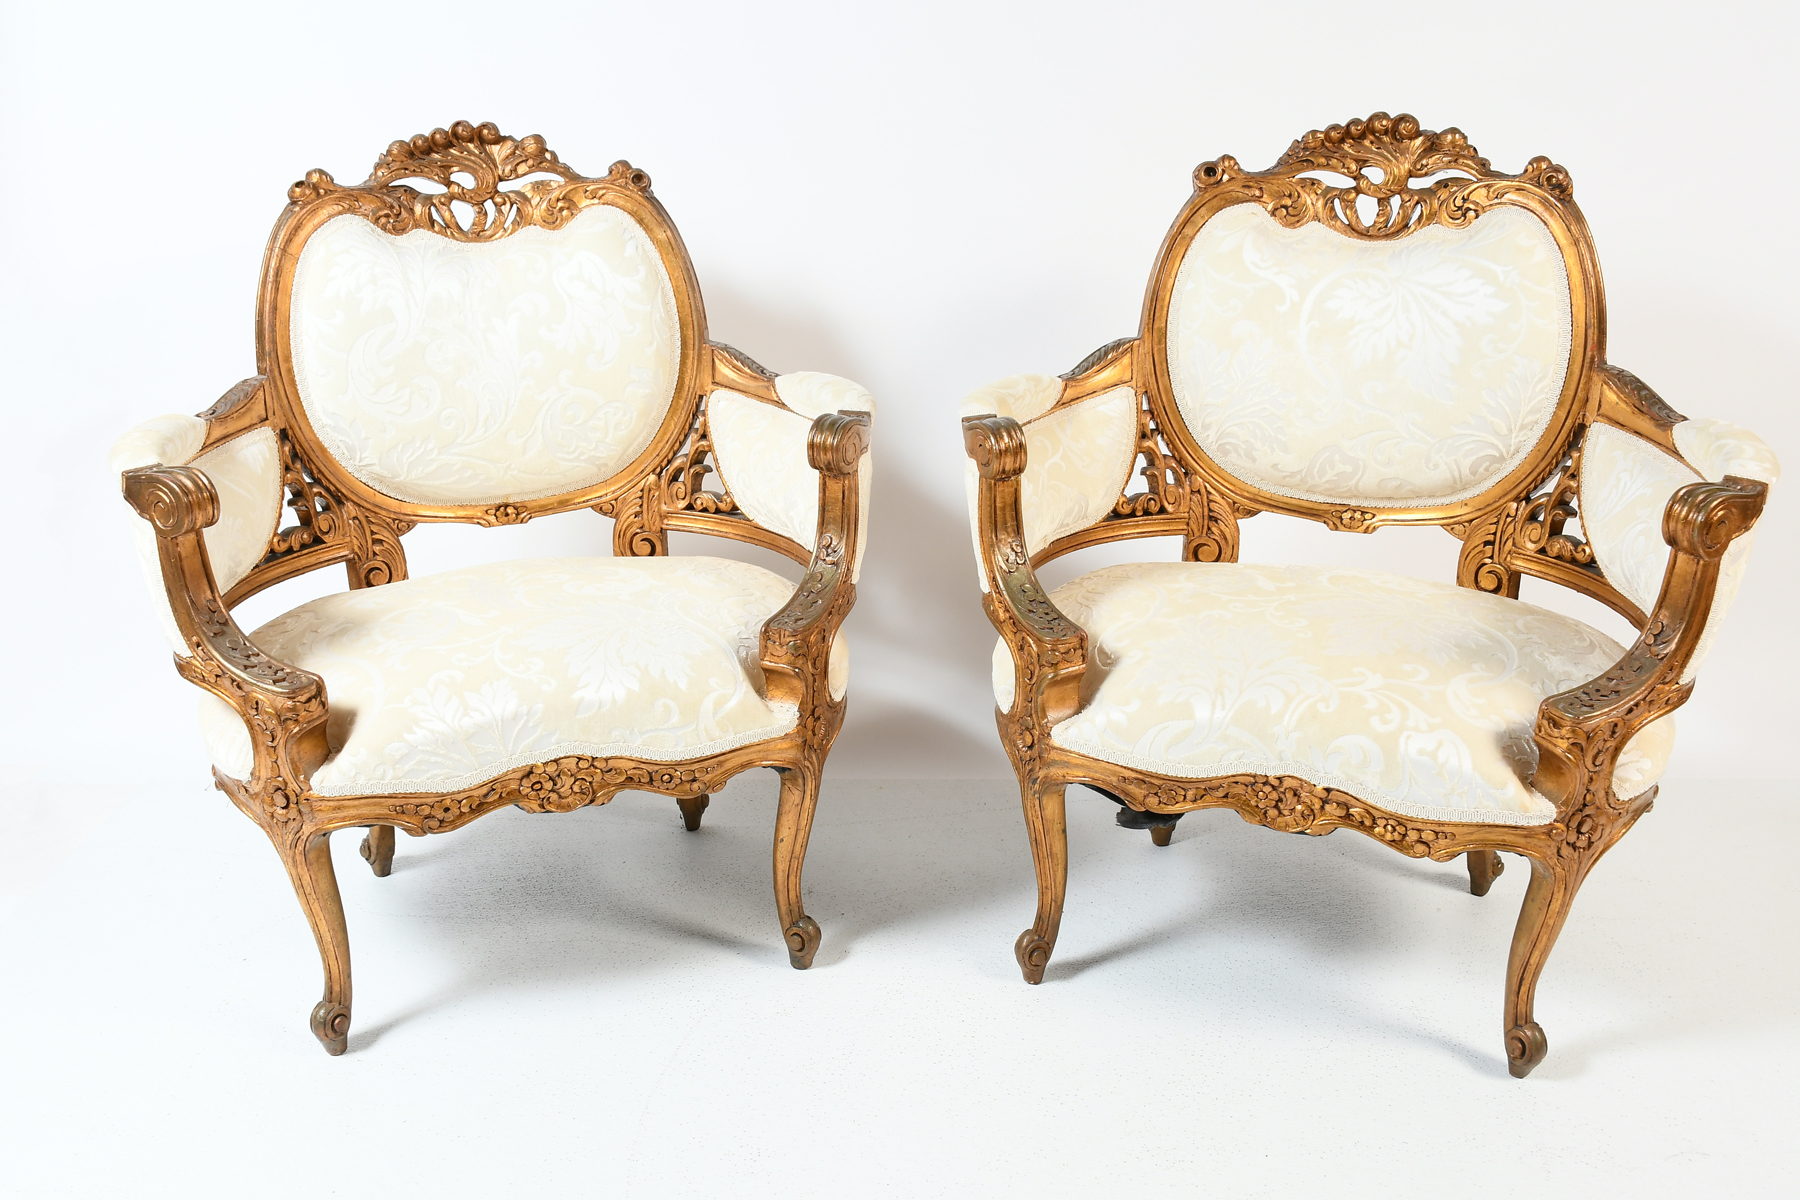 PR EARLY FRENCH GILDED WOOD ARMCHAIRS  2ed28d